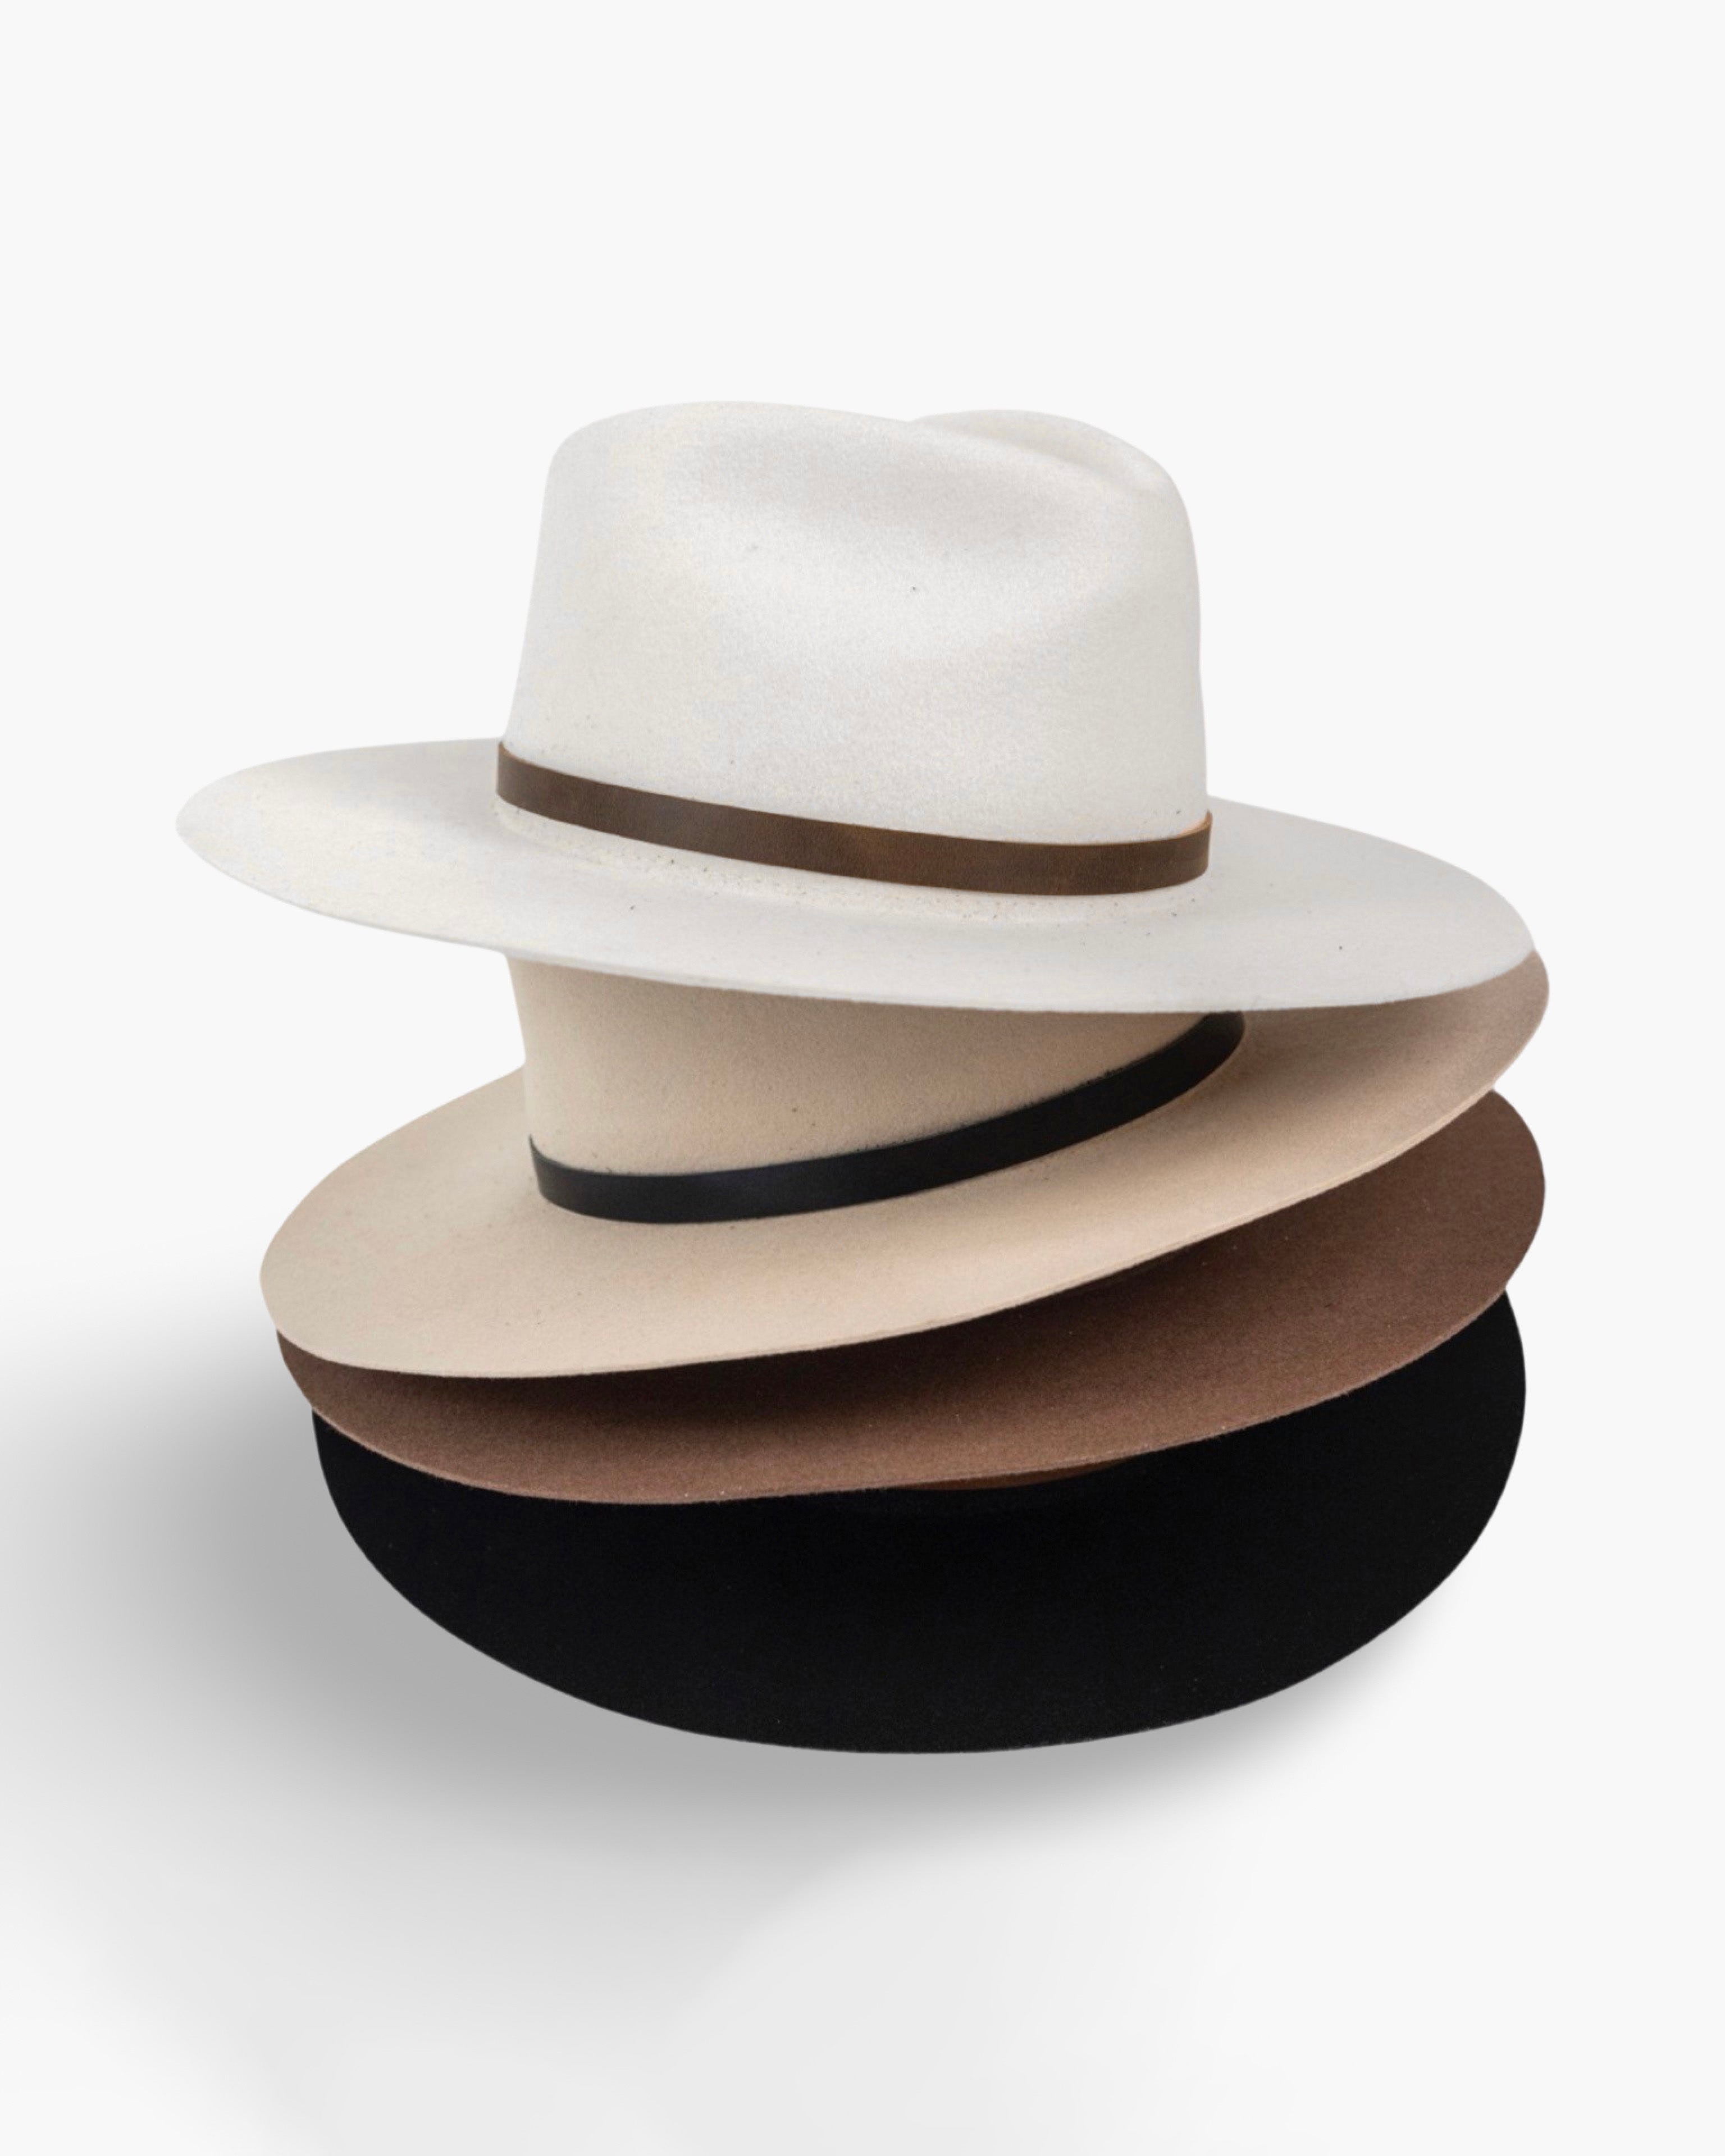 GREAT x Andar Leather Hat Band Accessory